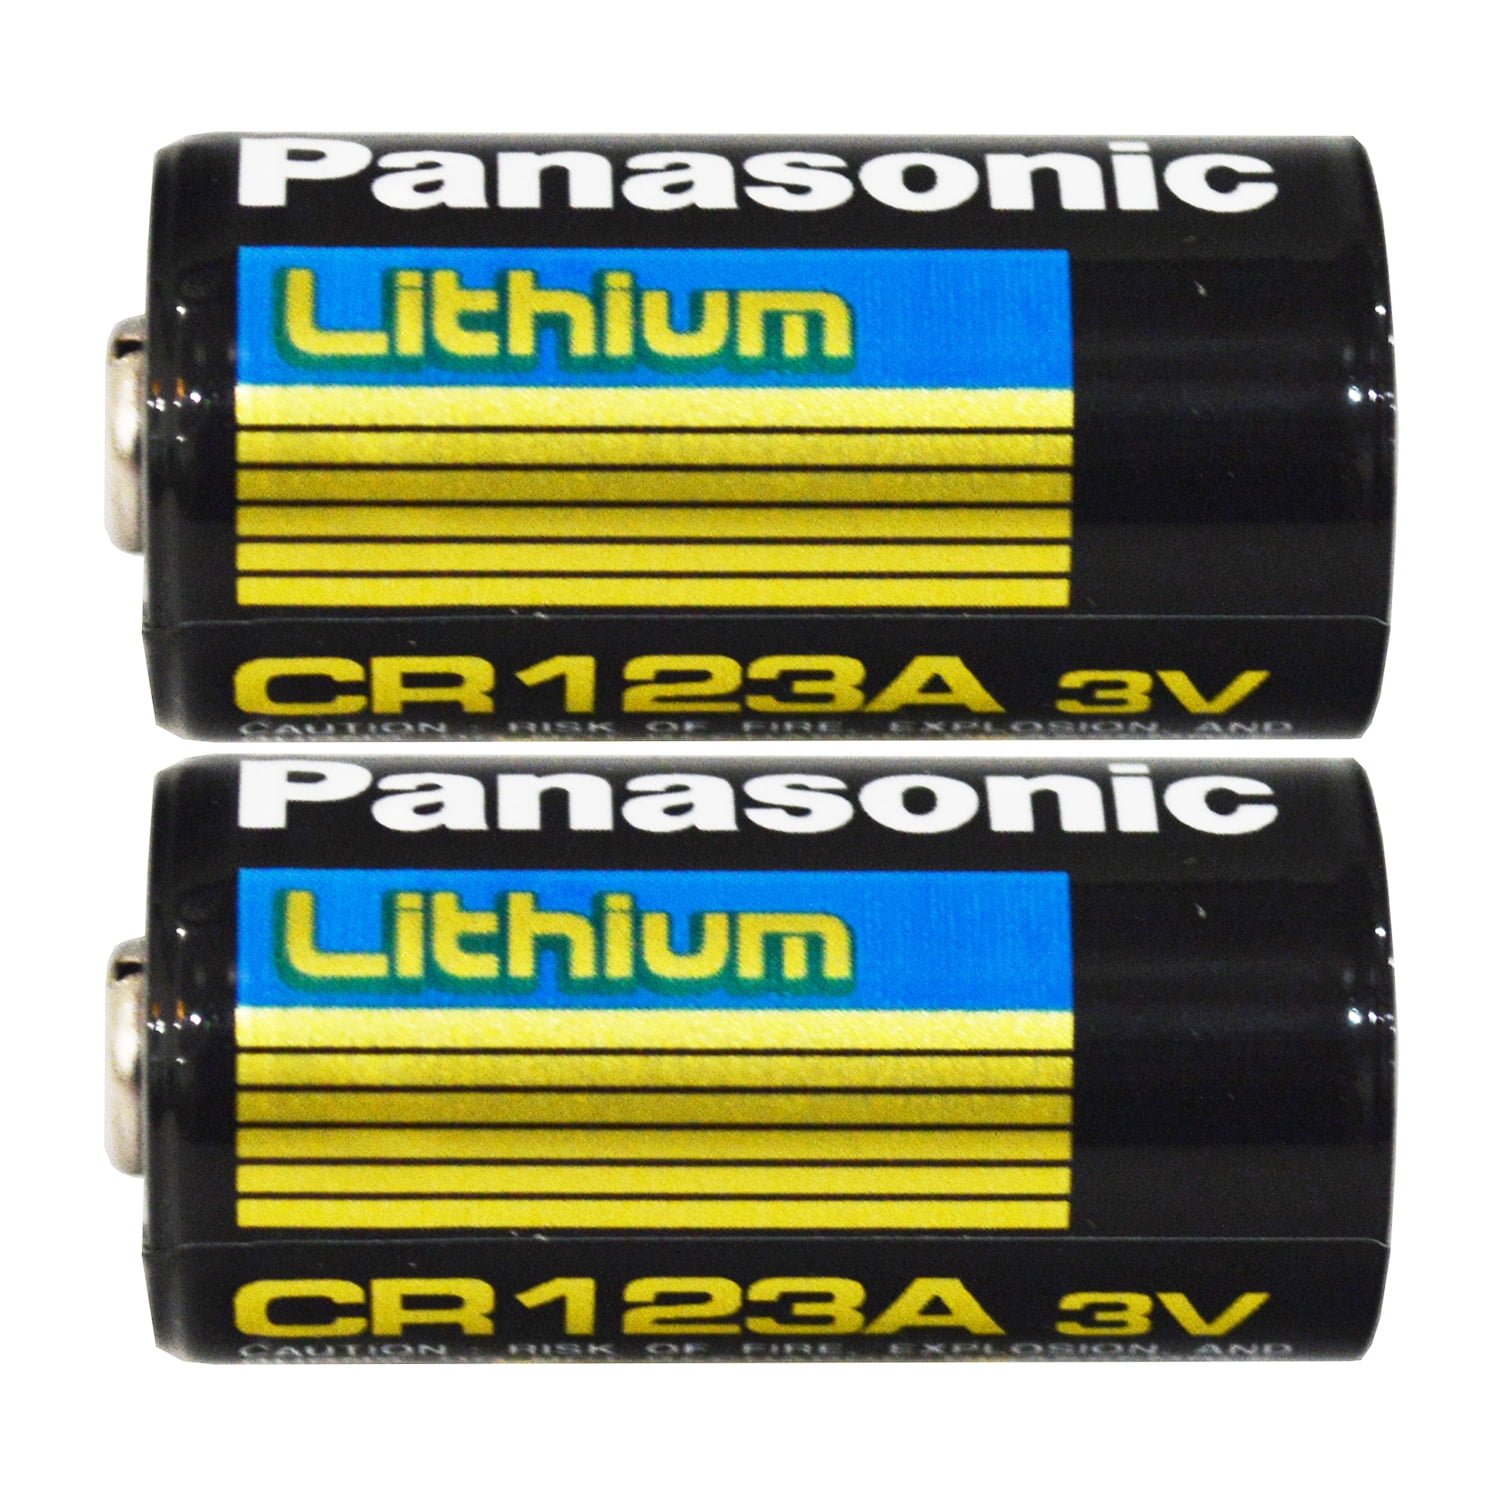 Buy Battery CR123A 3V Lithium - Panasonic online in India, Fab.to.Lab